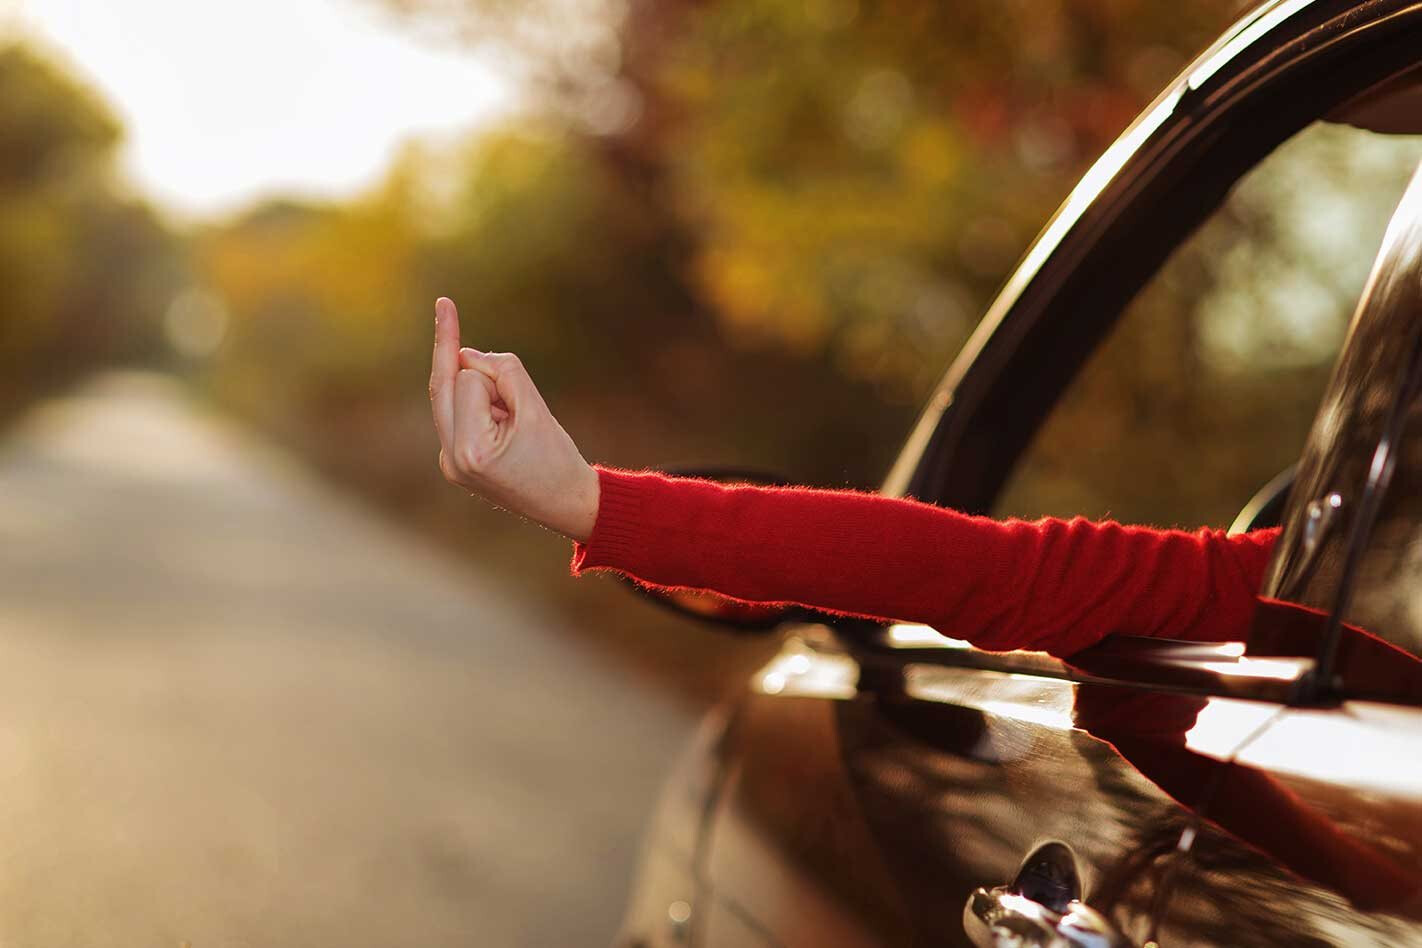 Opinion Driving Hand Signals We Should Have